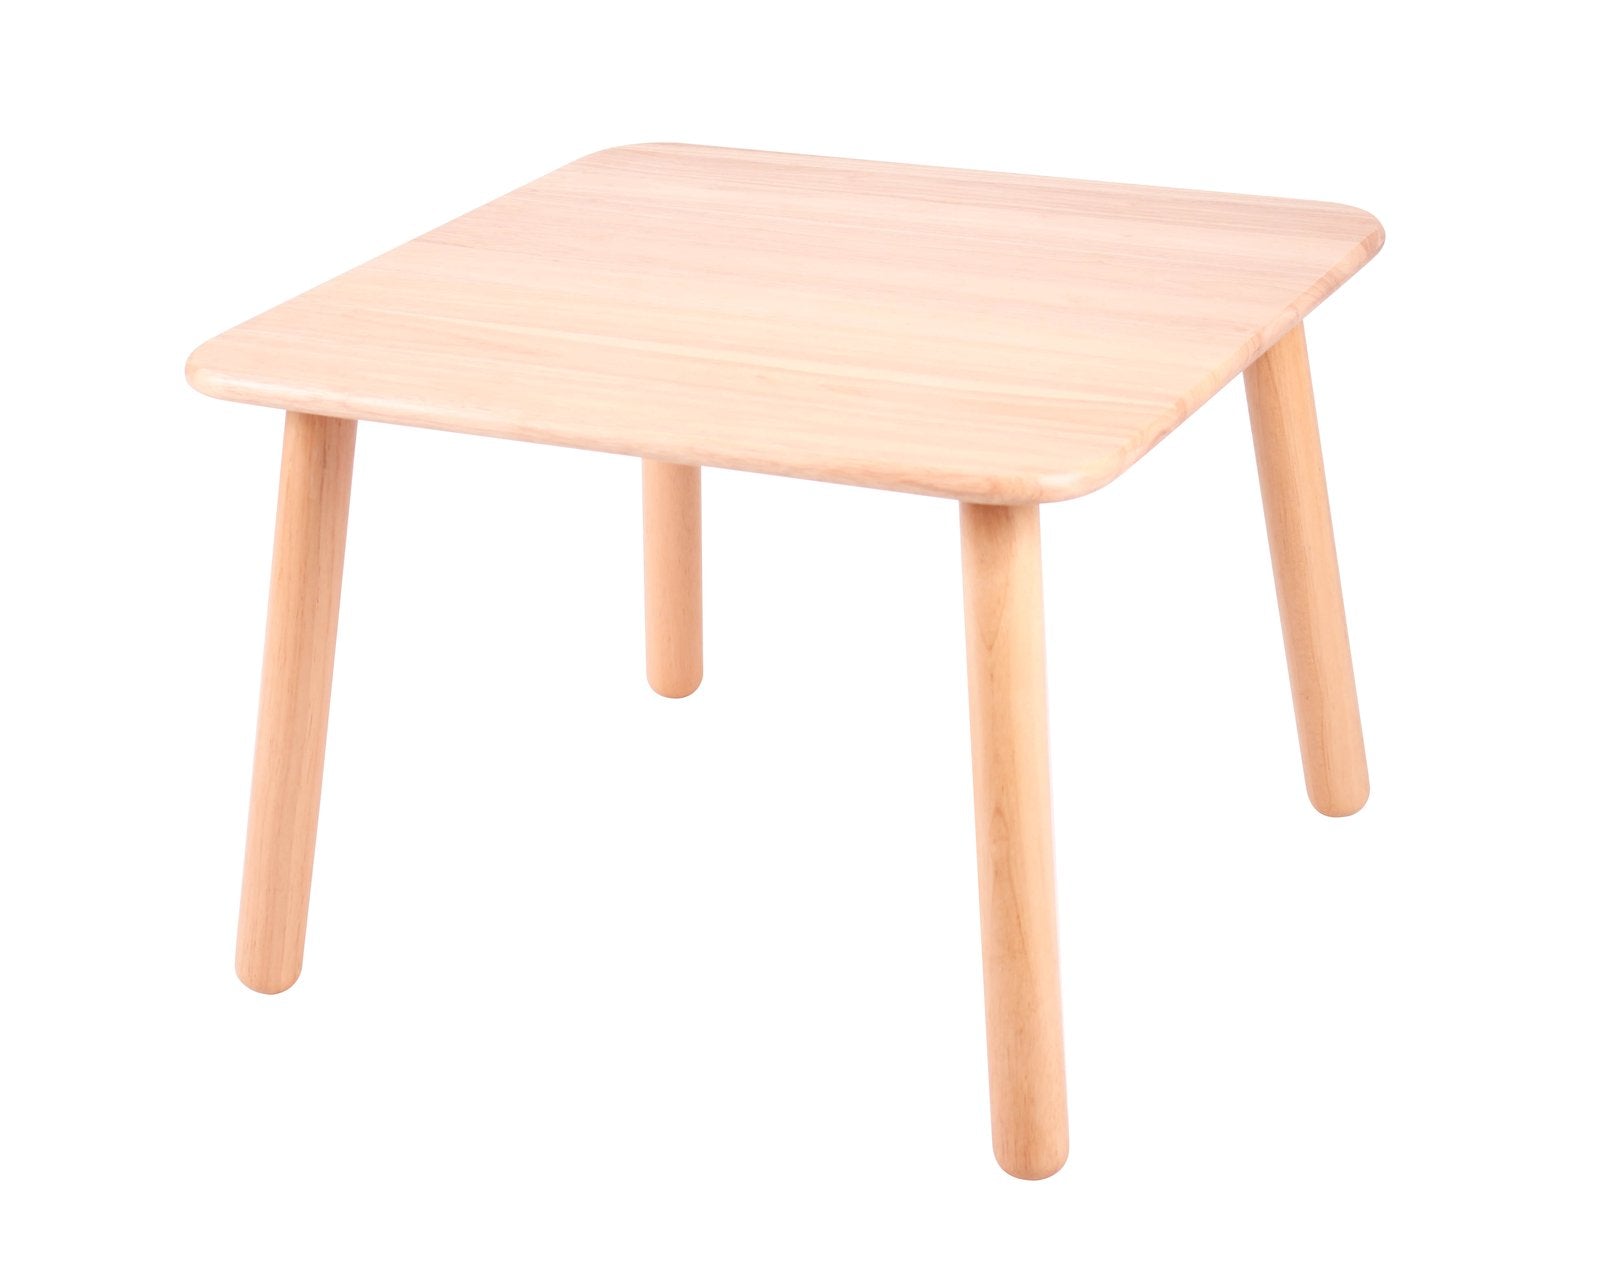 Brainsmith wooden kid's furniture with rounded edges 